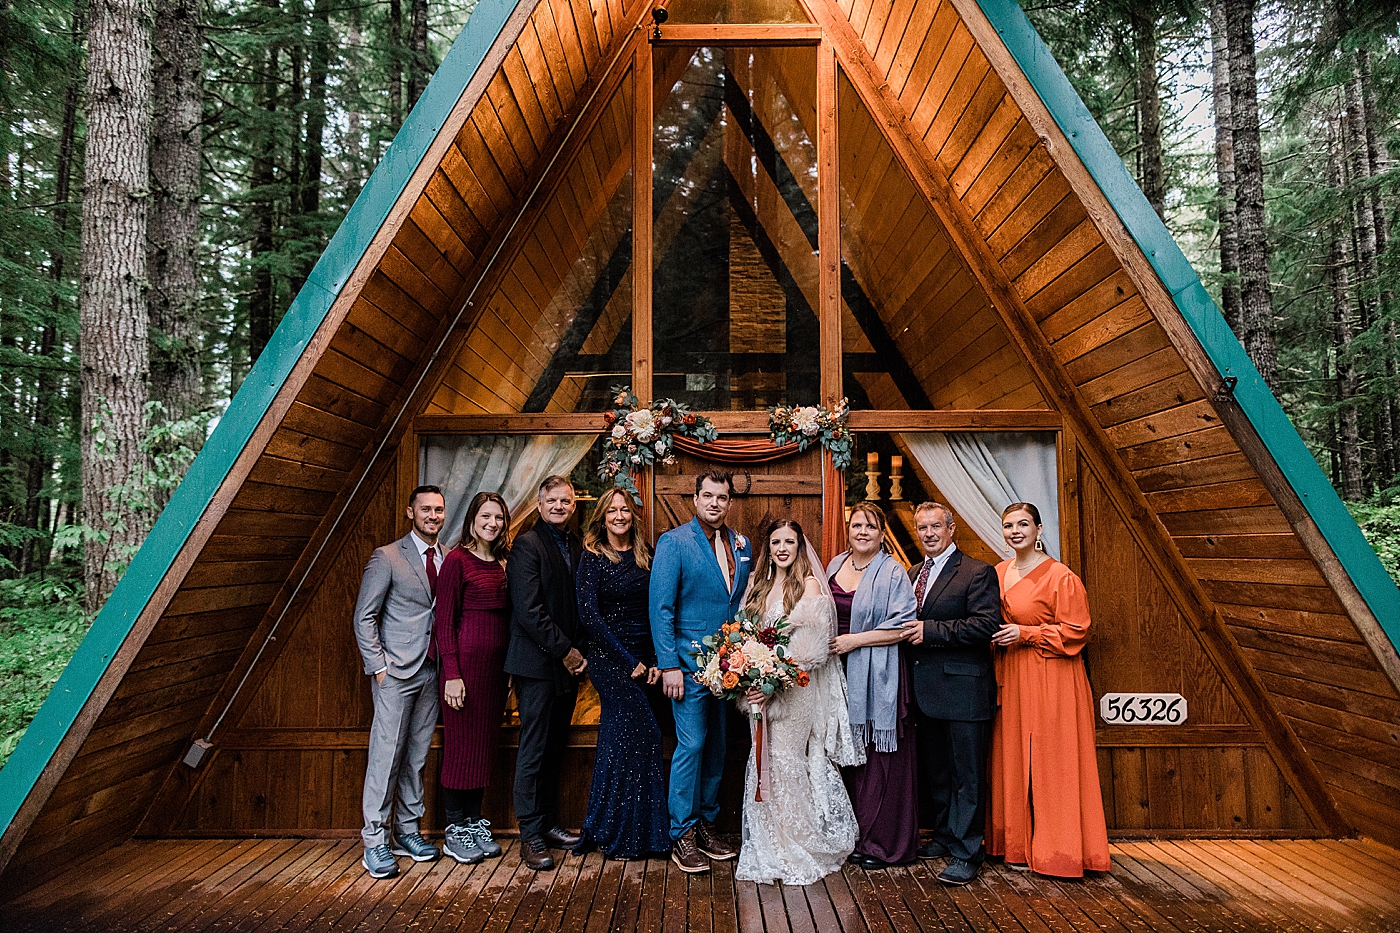 Intimate elopement with immediate family | Megan Montalvo Photography